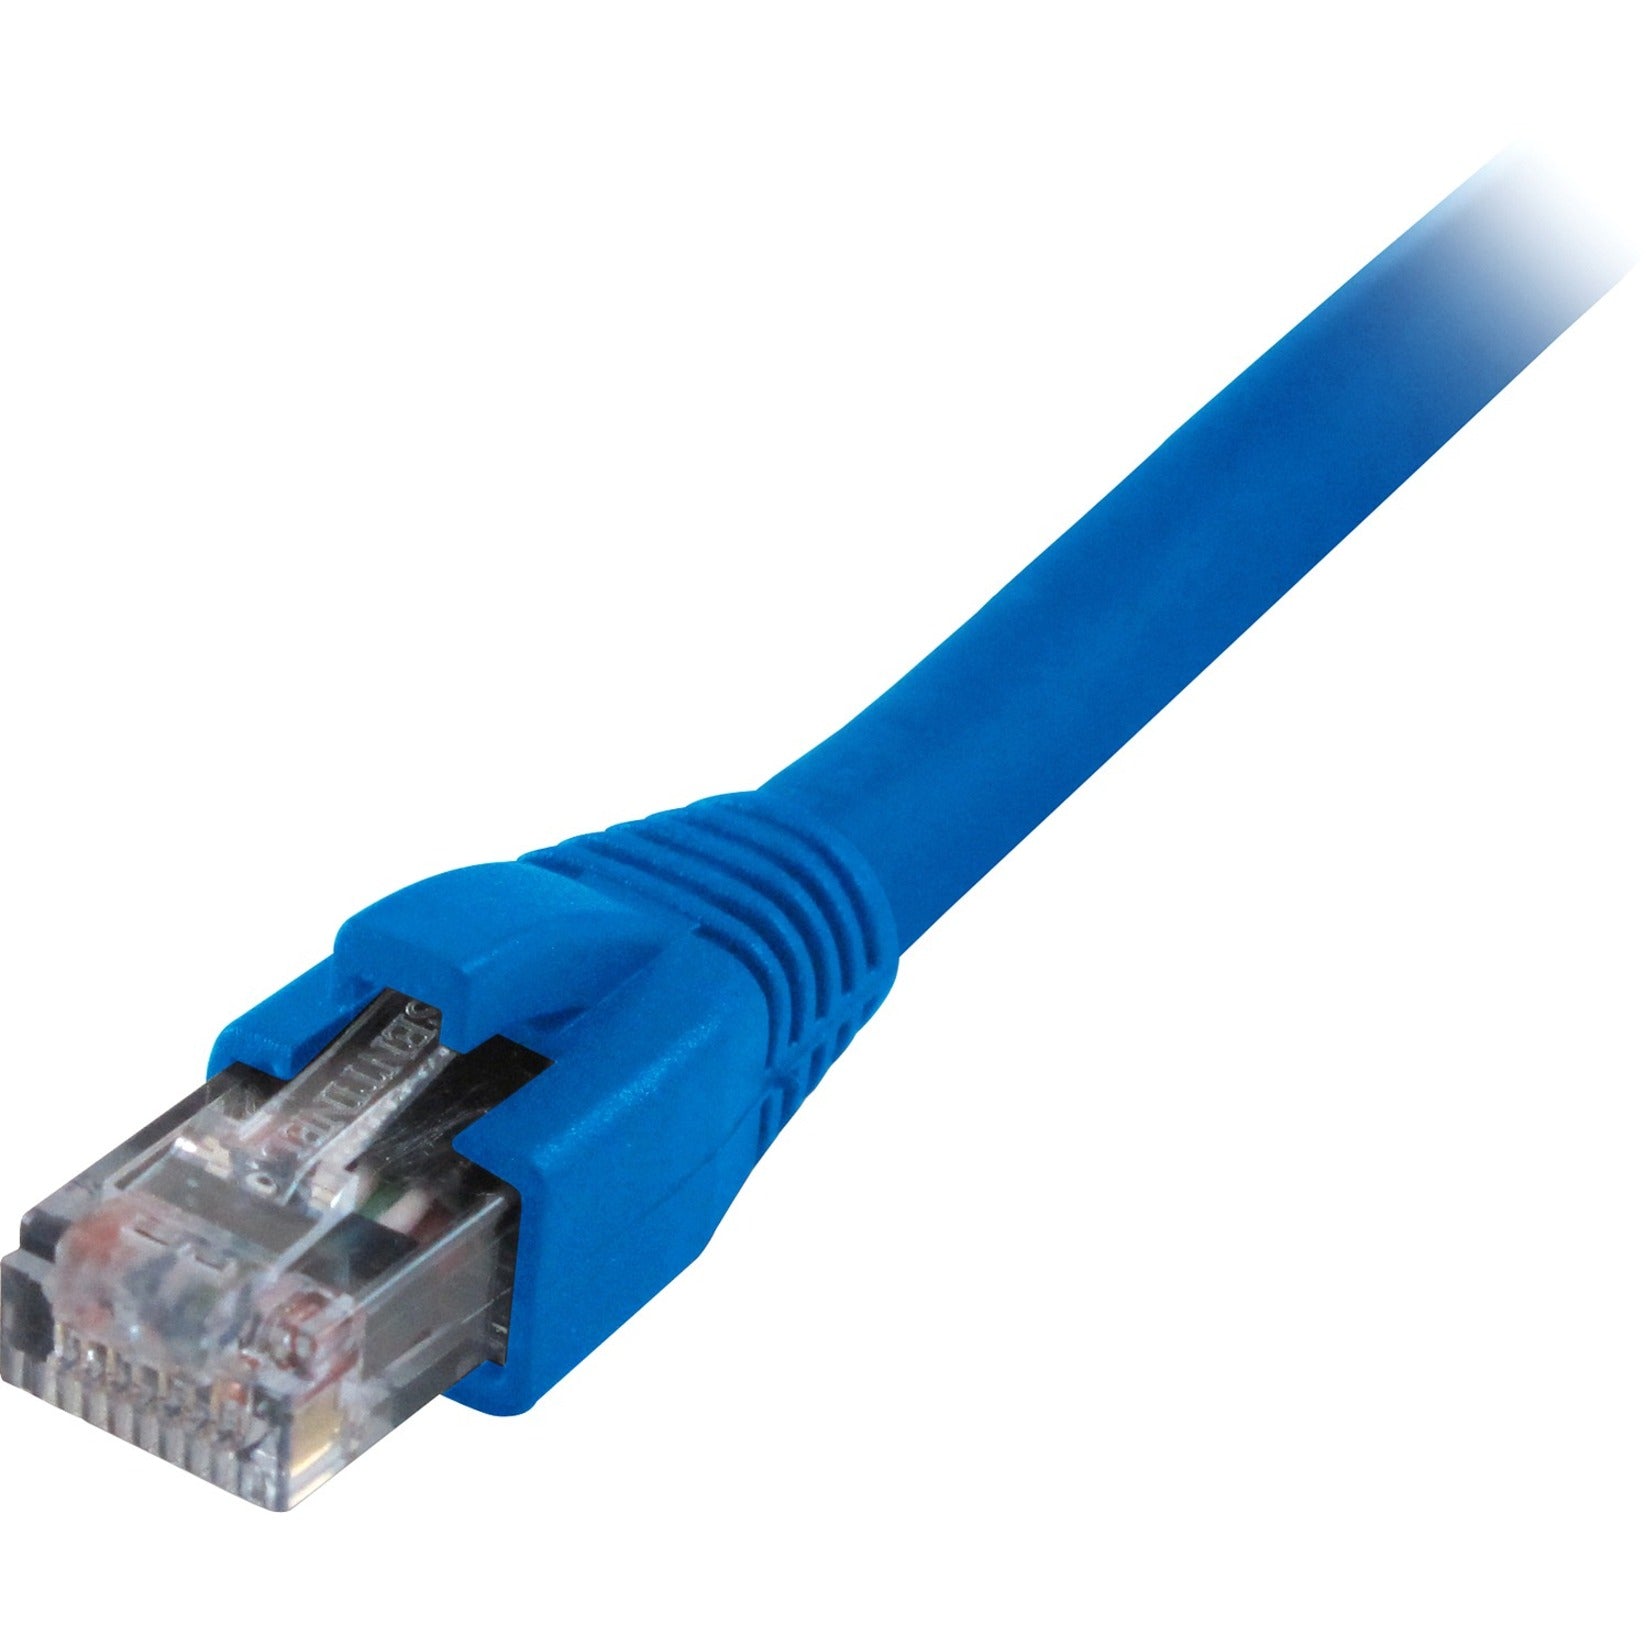 Comprehensive CAT5-350-7BLU Cat5e 350 Mhz Snagless Patch Cable 7ft Blue, Molded, Strain Relief, Stranded, Booted, 1 Gbit/s Data Transfer Rate